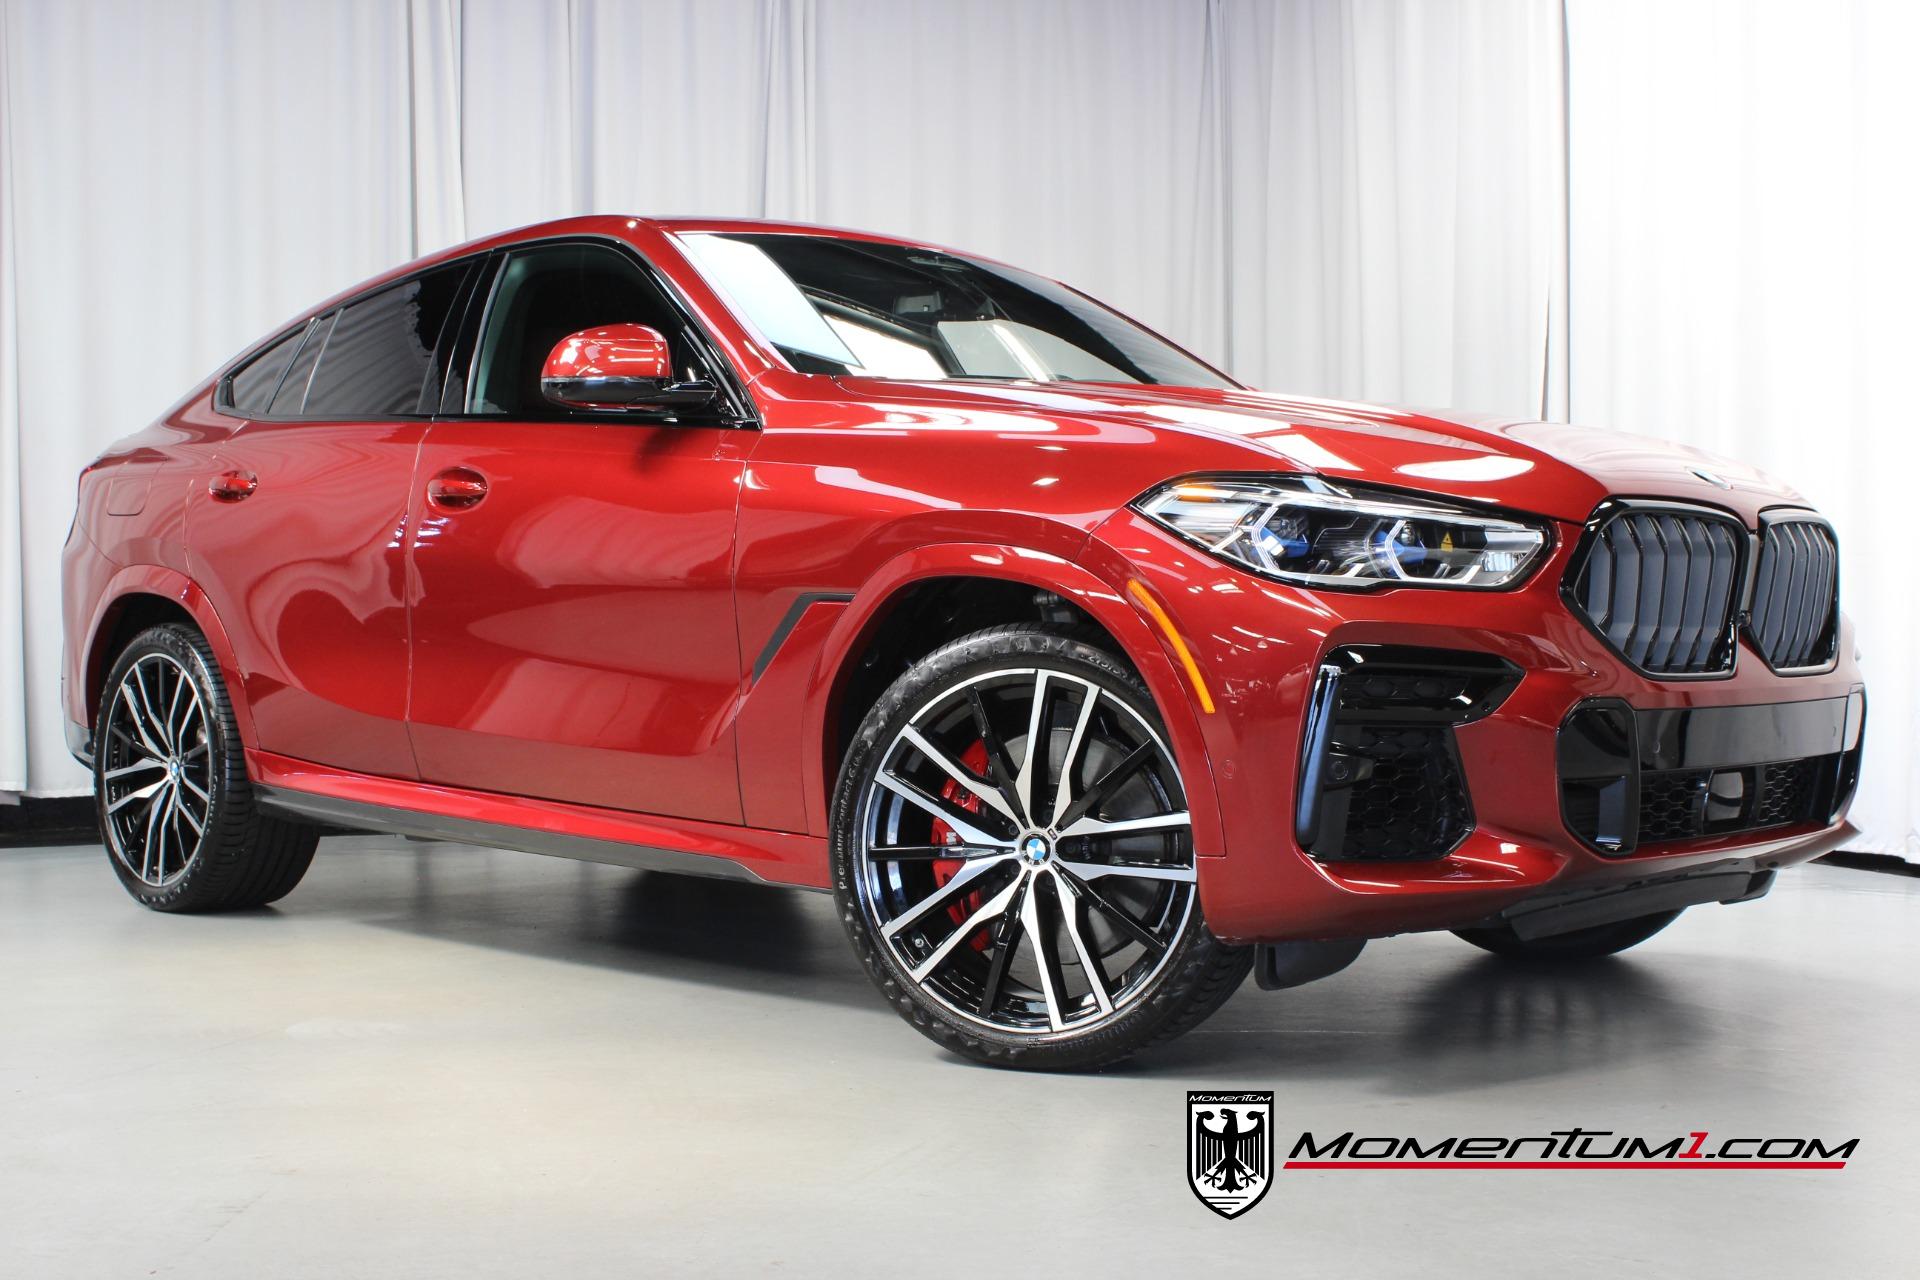 Used 2022 BMW X6 M50i For Sale (Sold) Momentum Motorcars Inc Stock